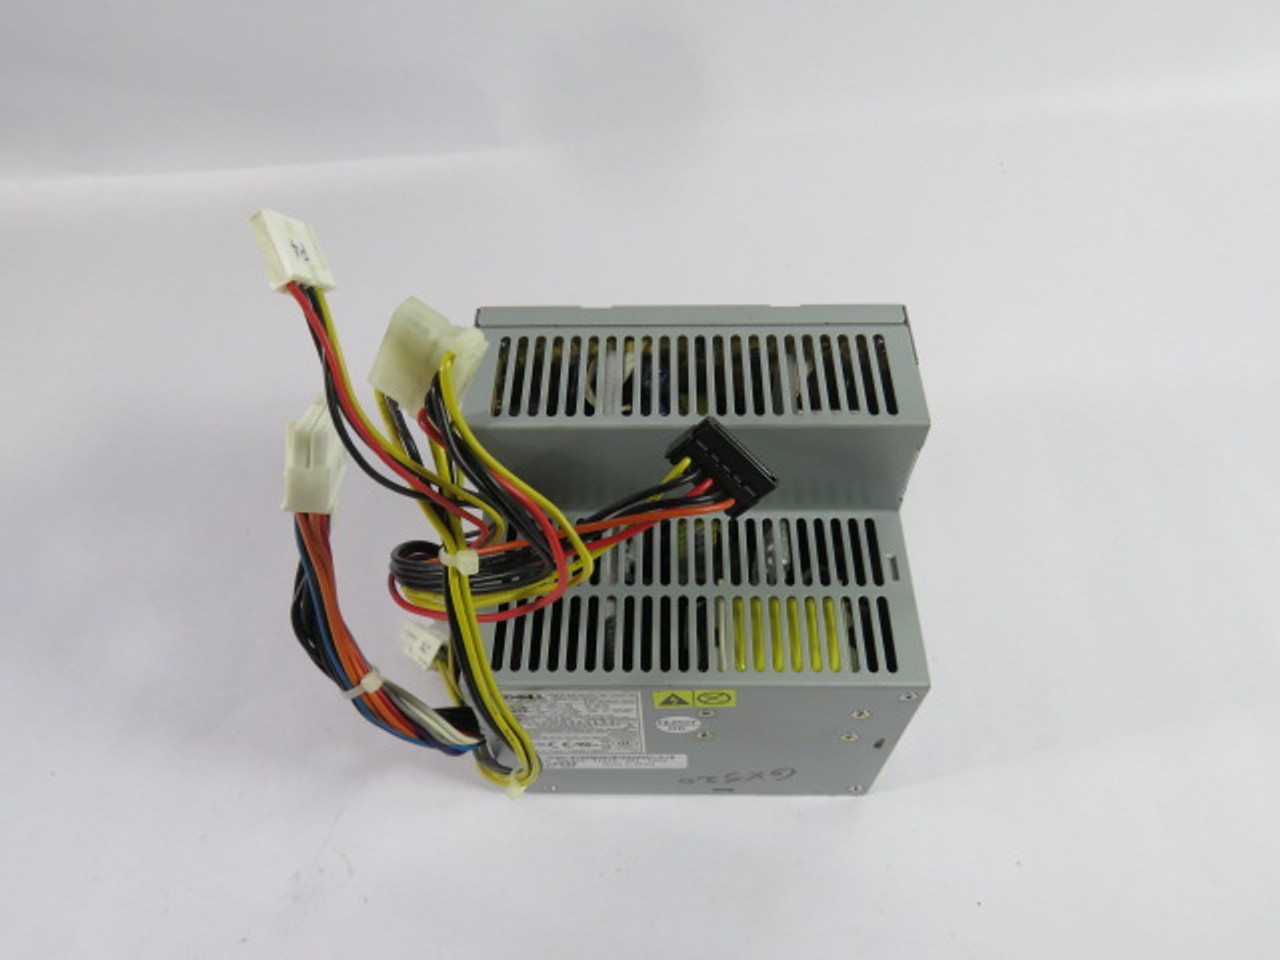 Dell PS-5221-5DF-LF Power Supply 220W Input 100-120V 5A Output +5V 17A USED